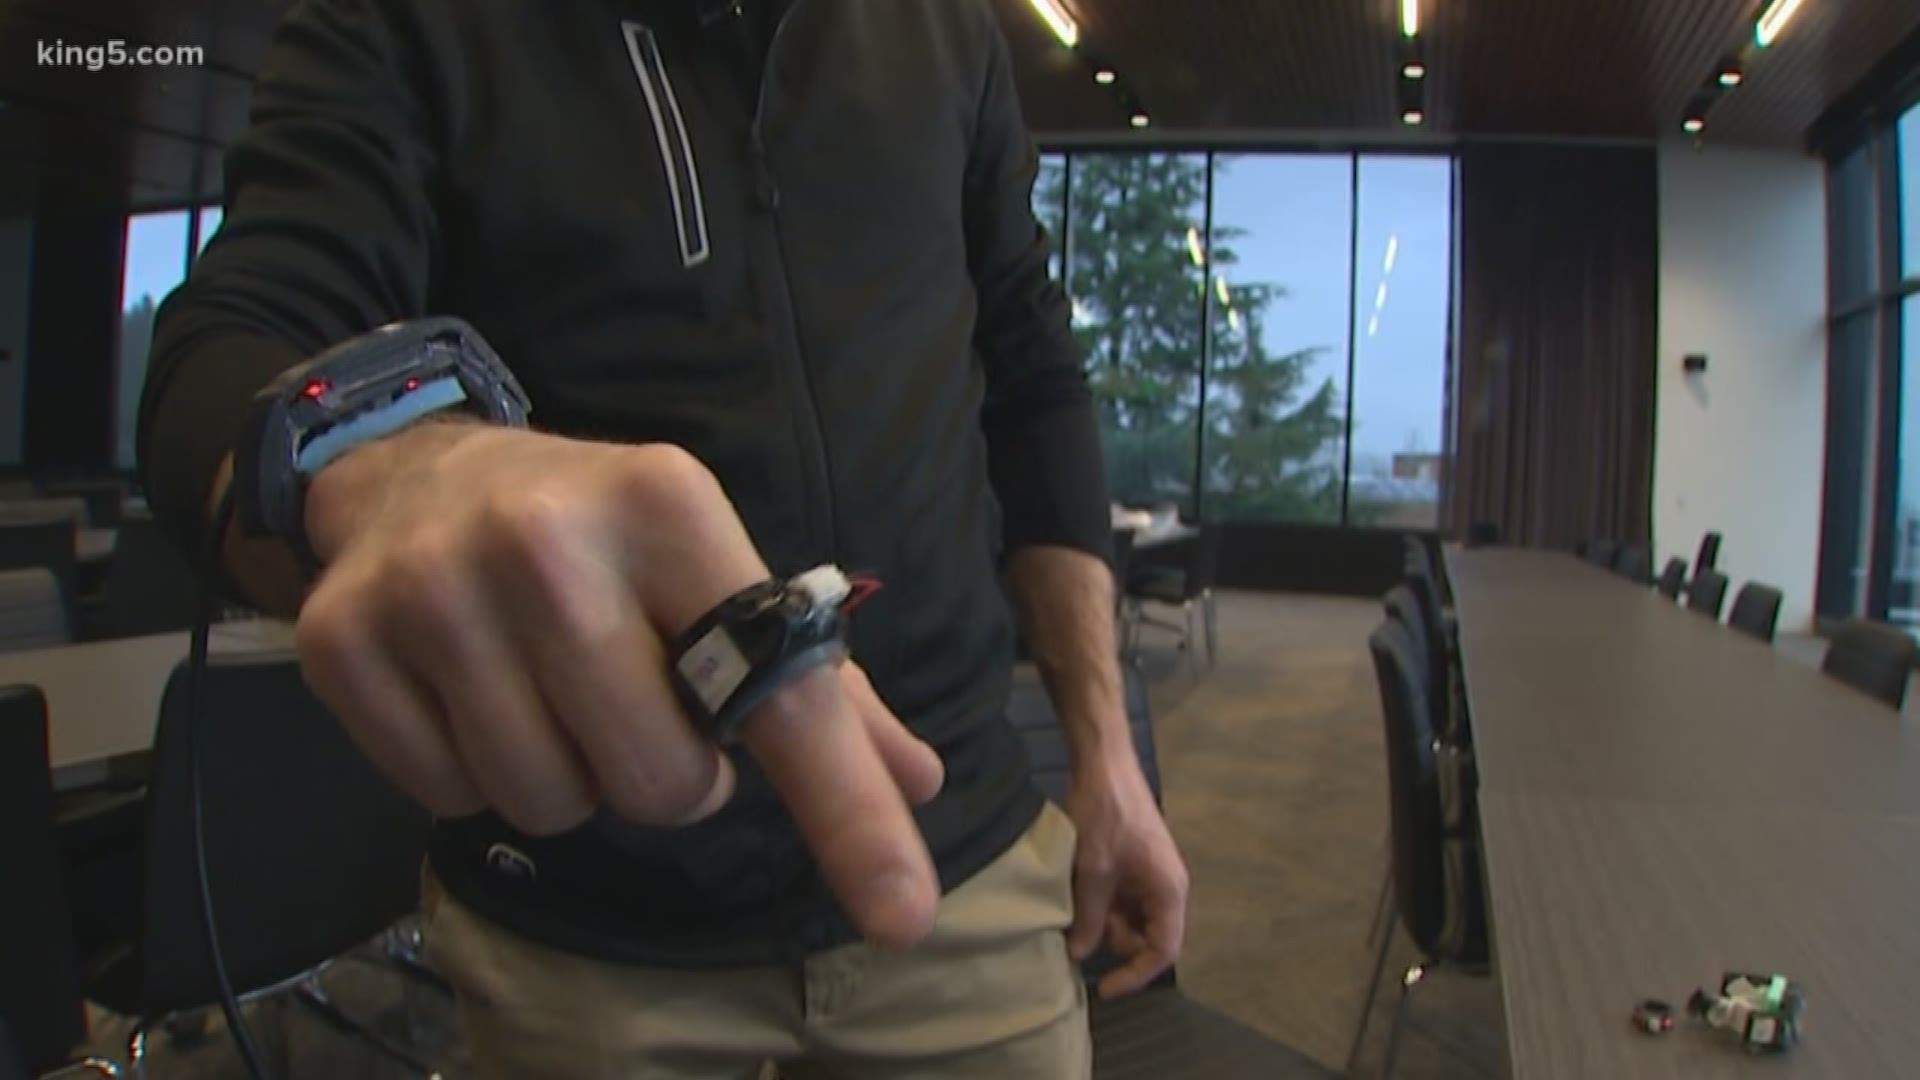 Oura, one ring to rule them all?